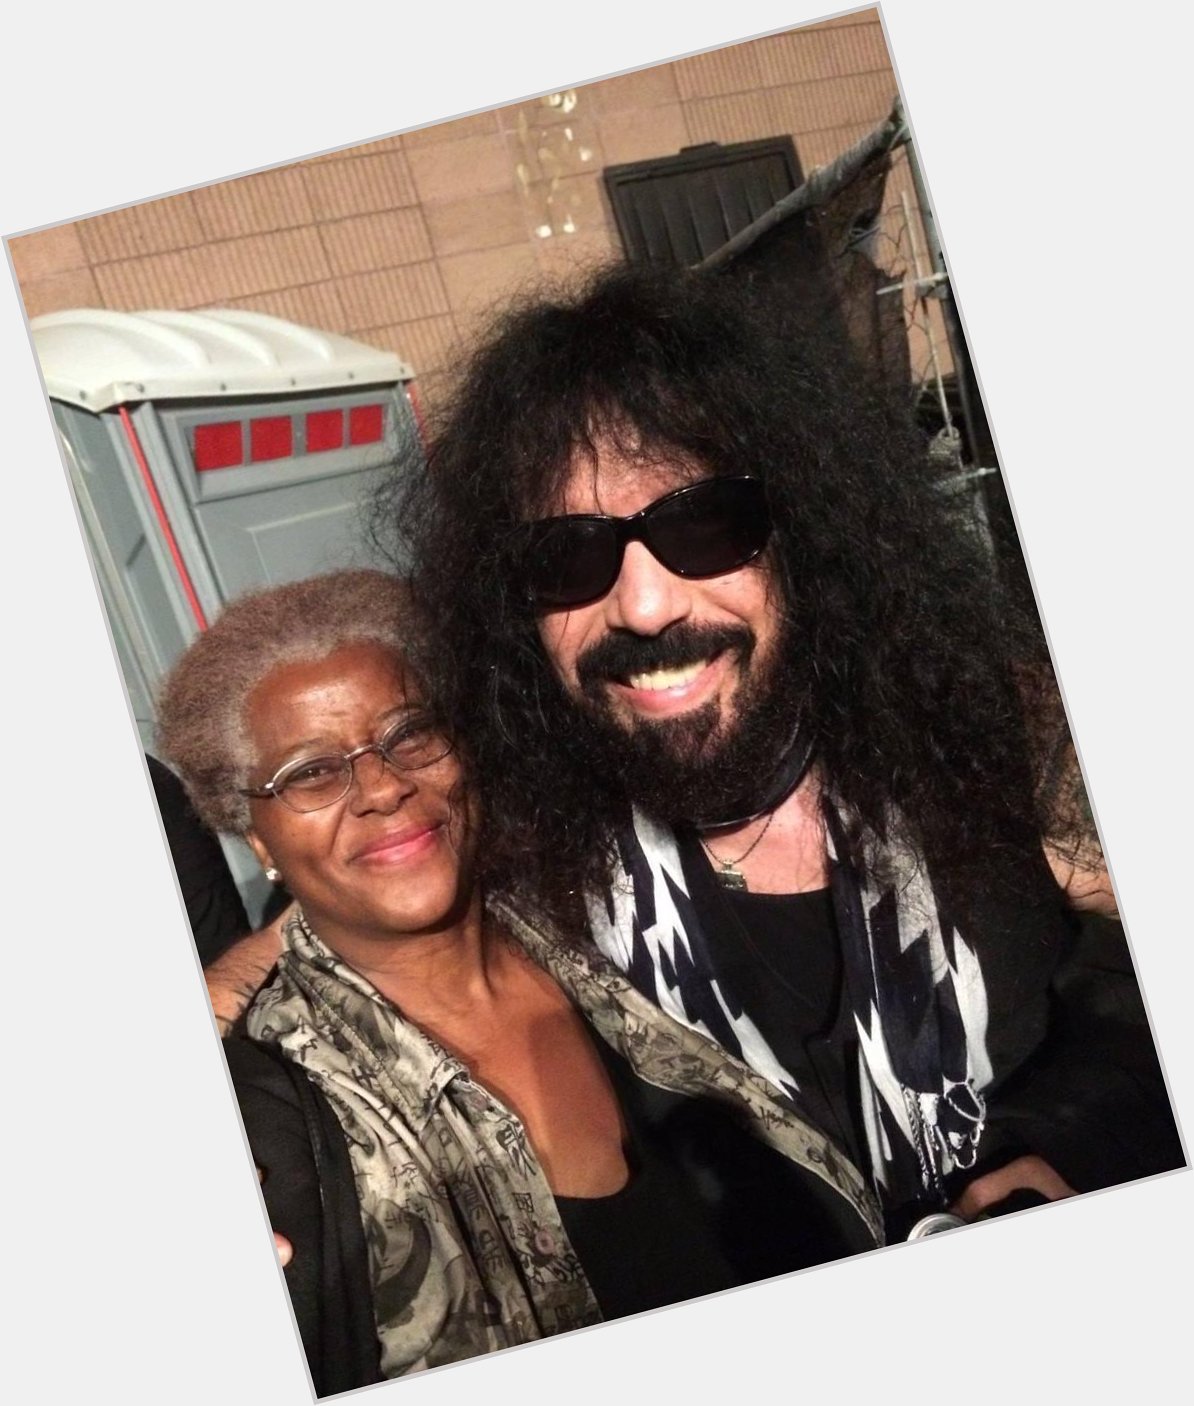 Happy Birthday in heaven today to Frankie Banali of Quiet Riot. Love and miss you my friend. 